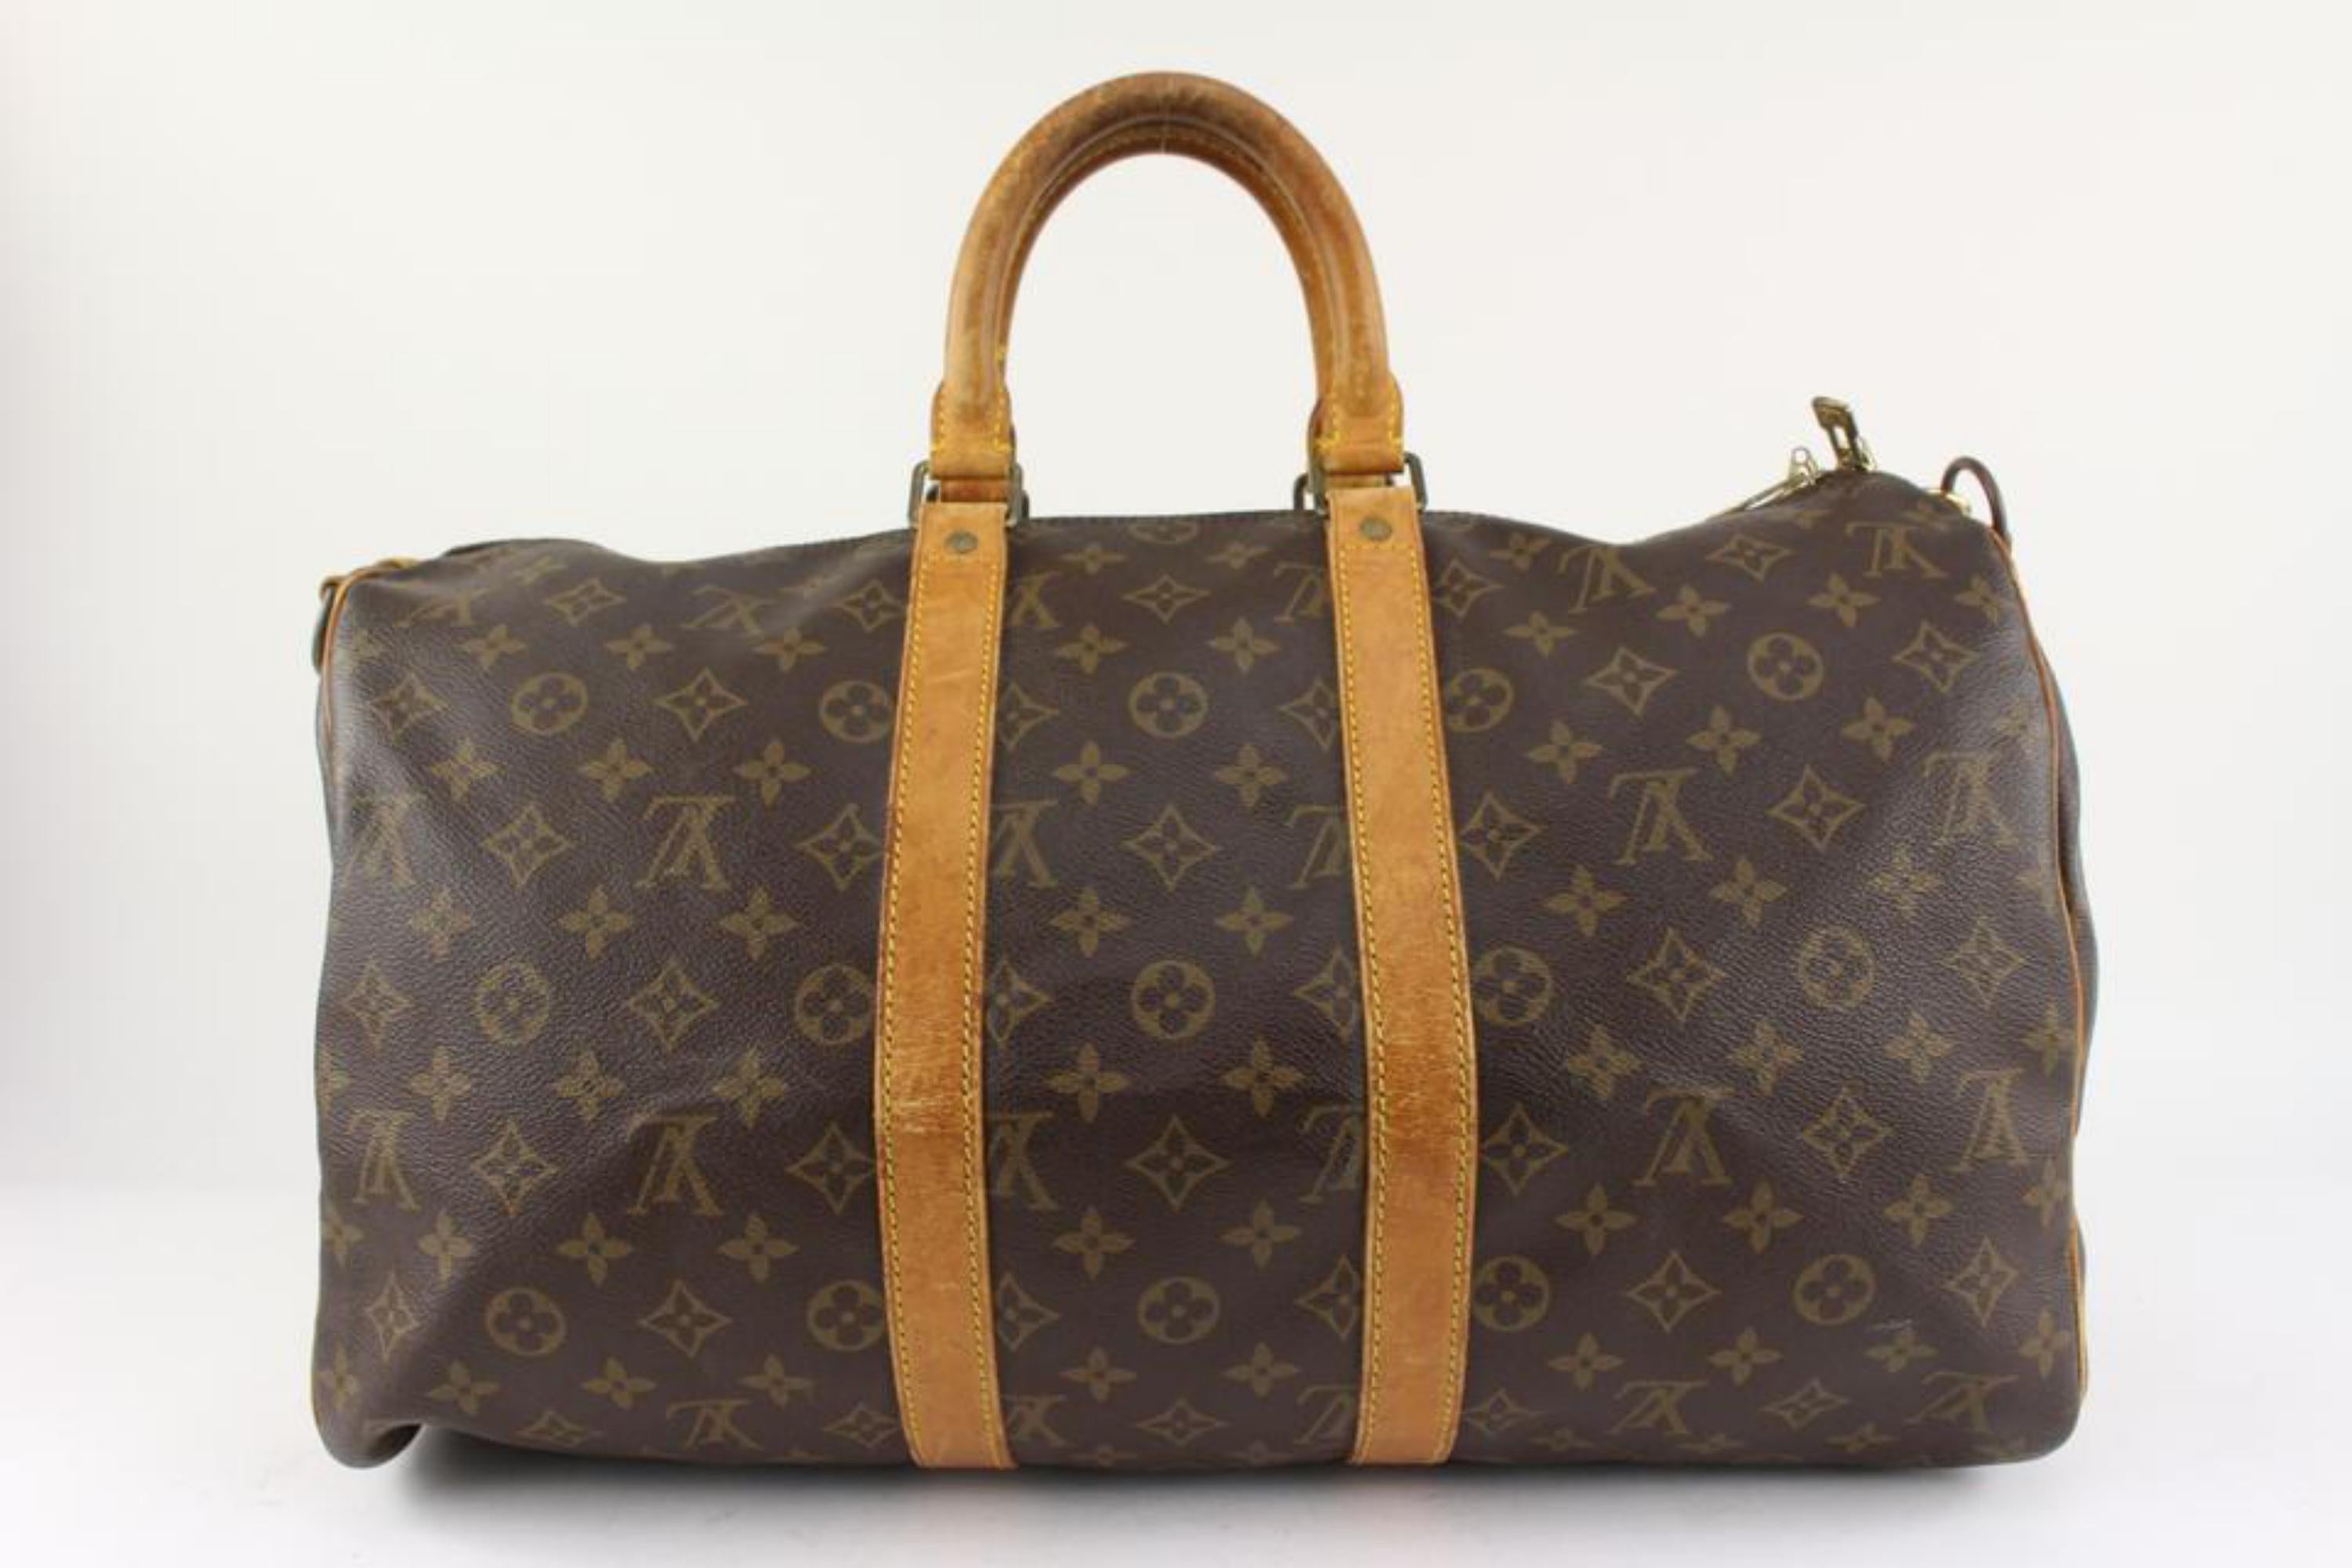 Louis Vuitton Monogram Keepall Bandouliere 45 Duffle Bag with Strap 1122lv11 For Sale 1